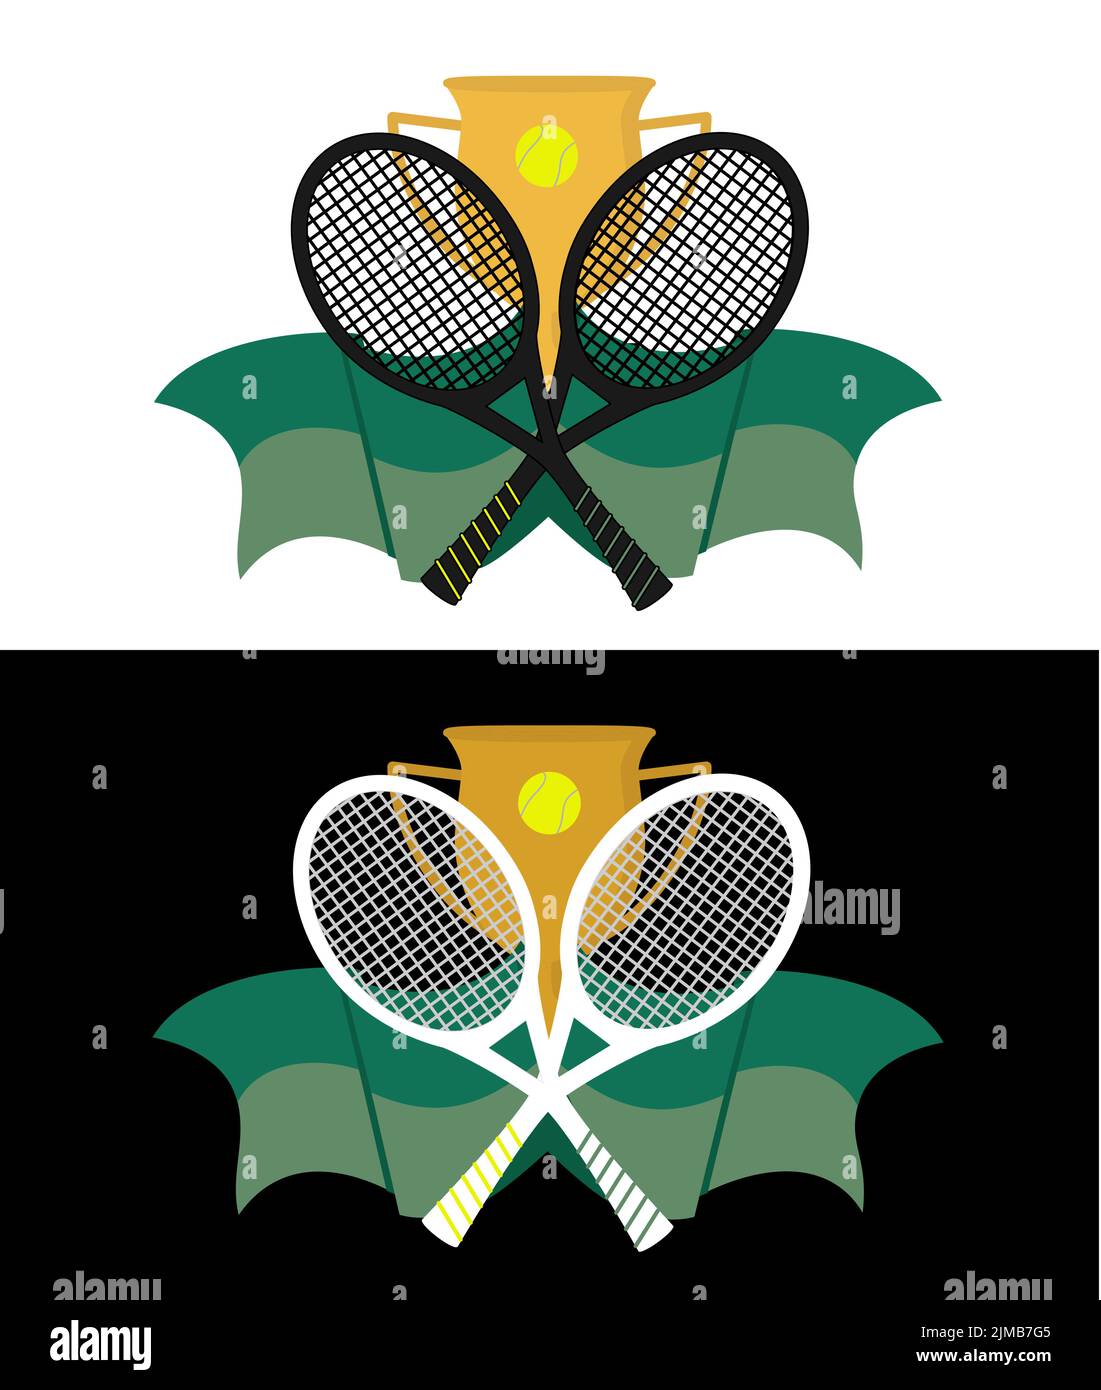 Tennis sport logo icon design badge template, design element with two rackets, prize cup and ball. Green, yellow, black and white colors. Made in vect Stock Vector